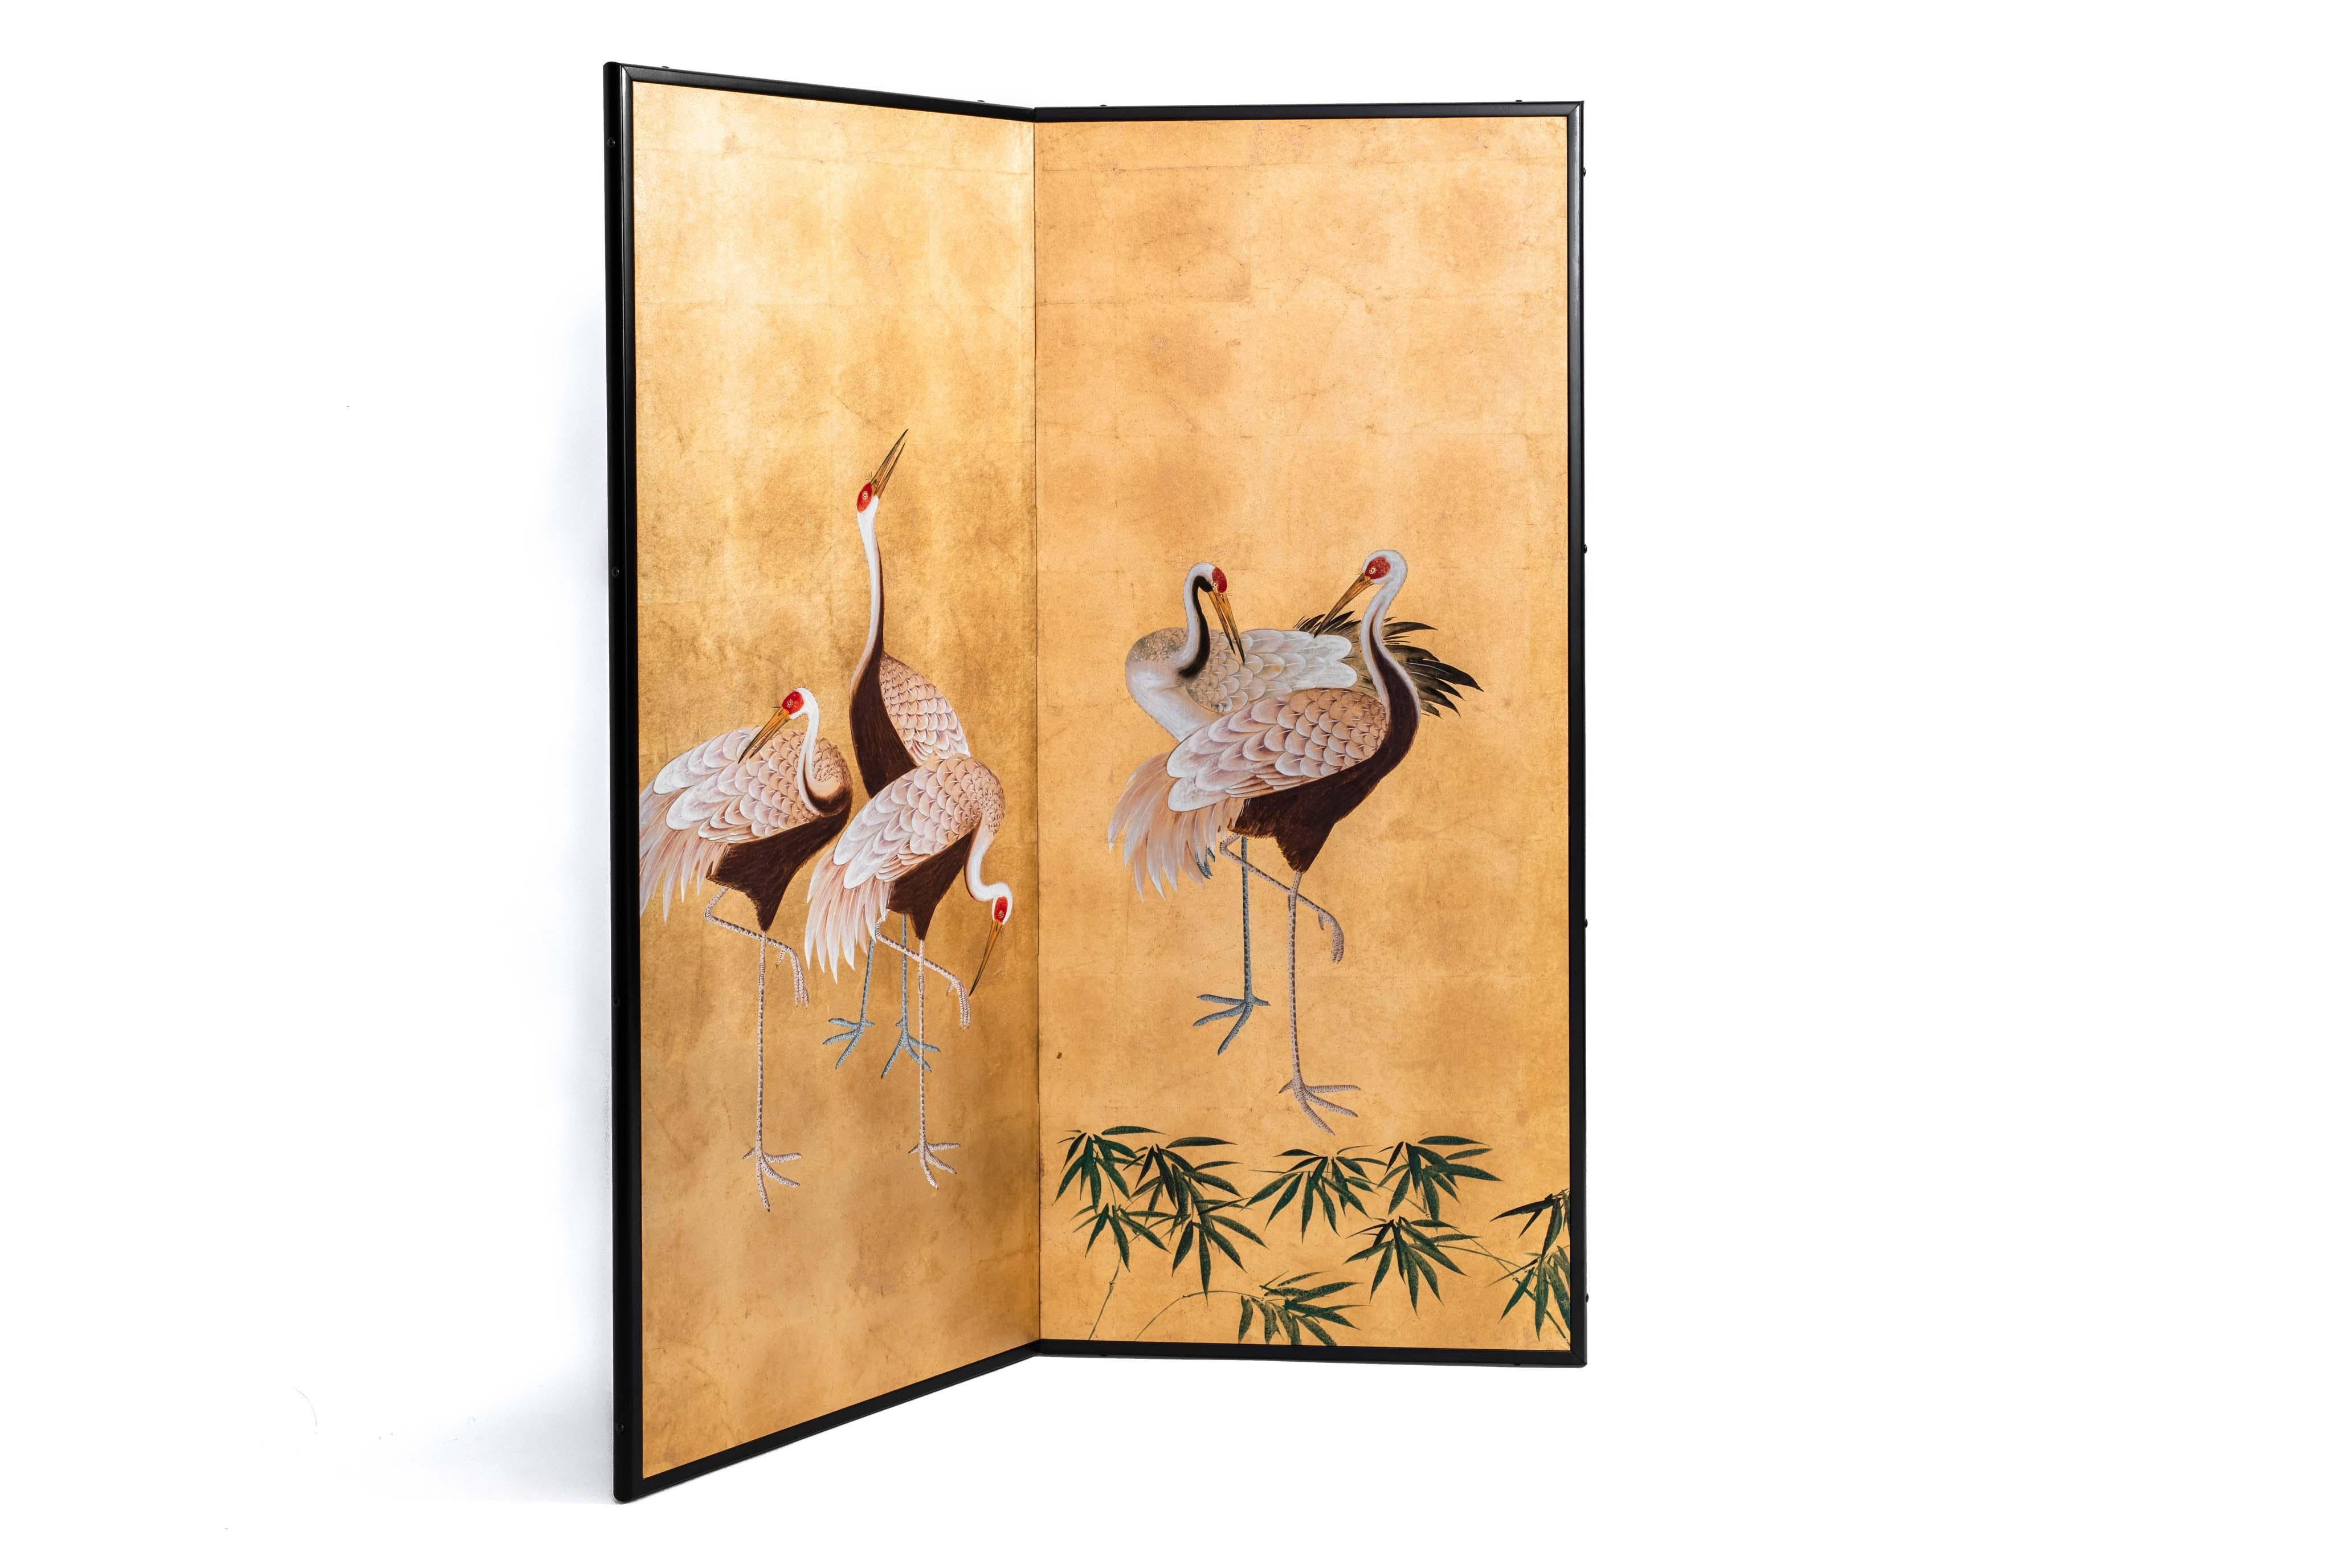 Hand-Crafted Contemporary Hand-Painted Japanese Screen of Standing Cranes